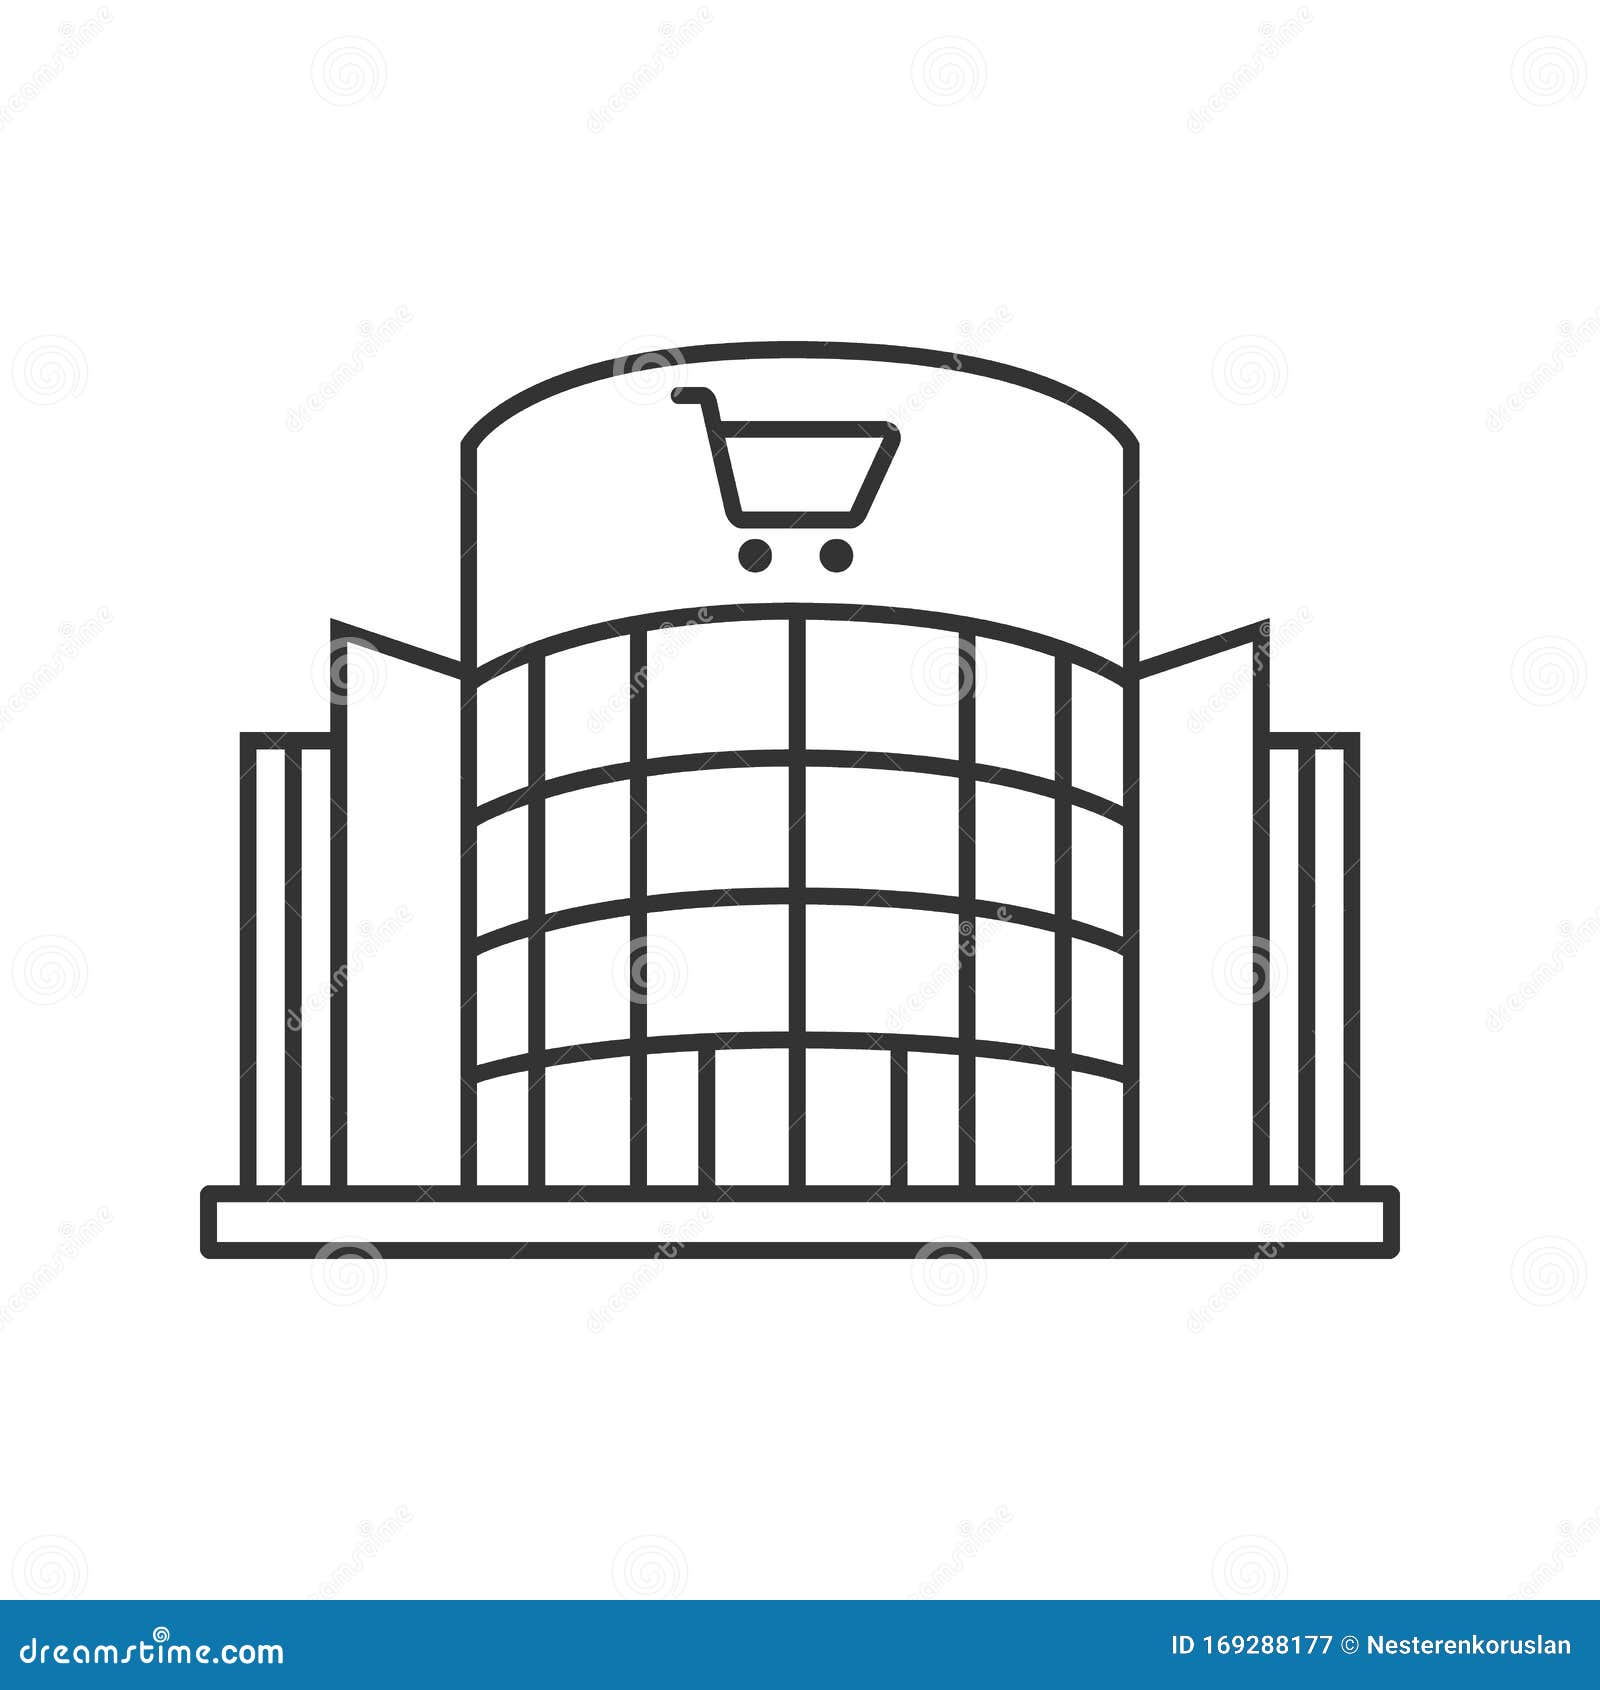 Shopping Centre Linear Icon Stock Vector - Illustration of architecture ...